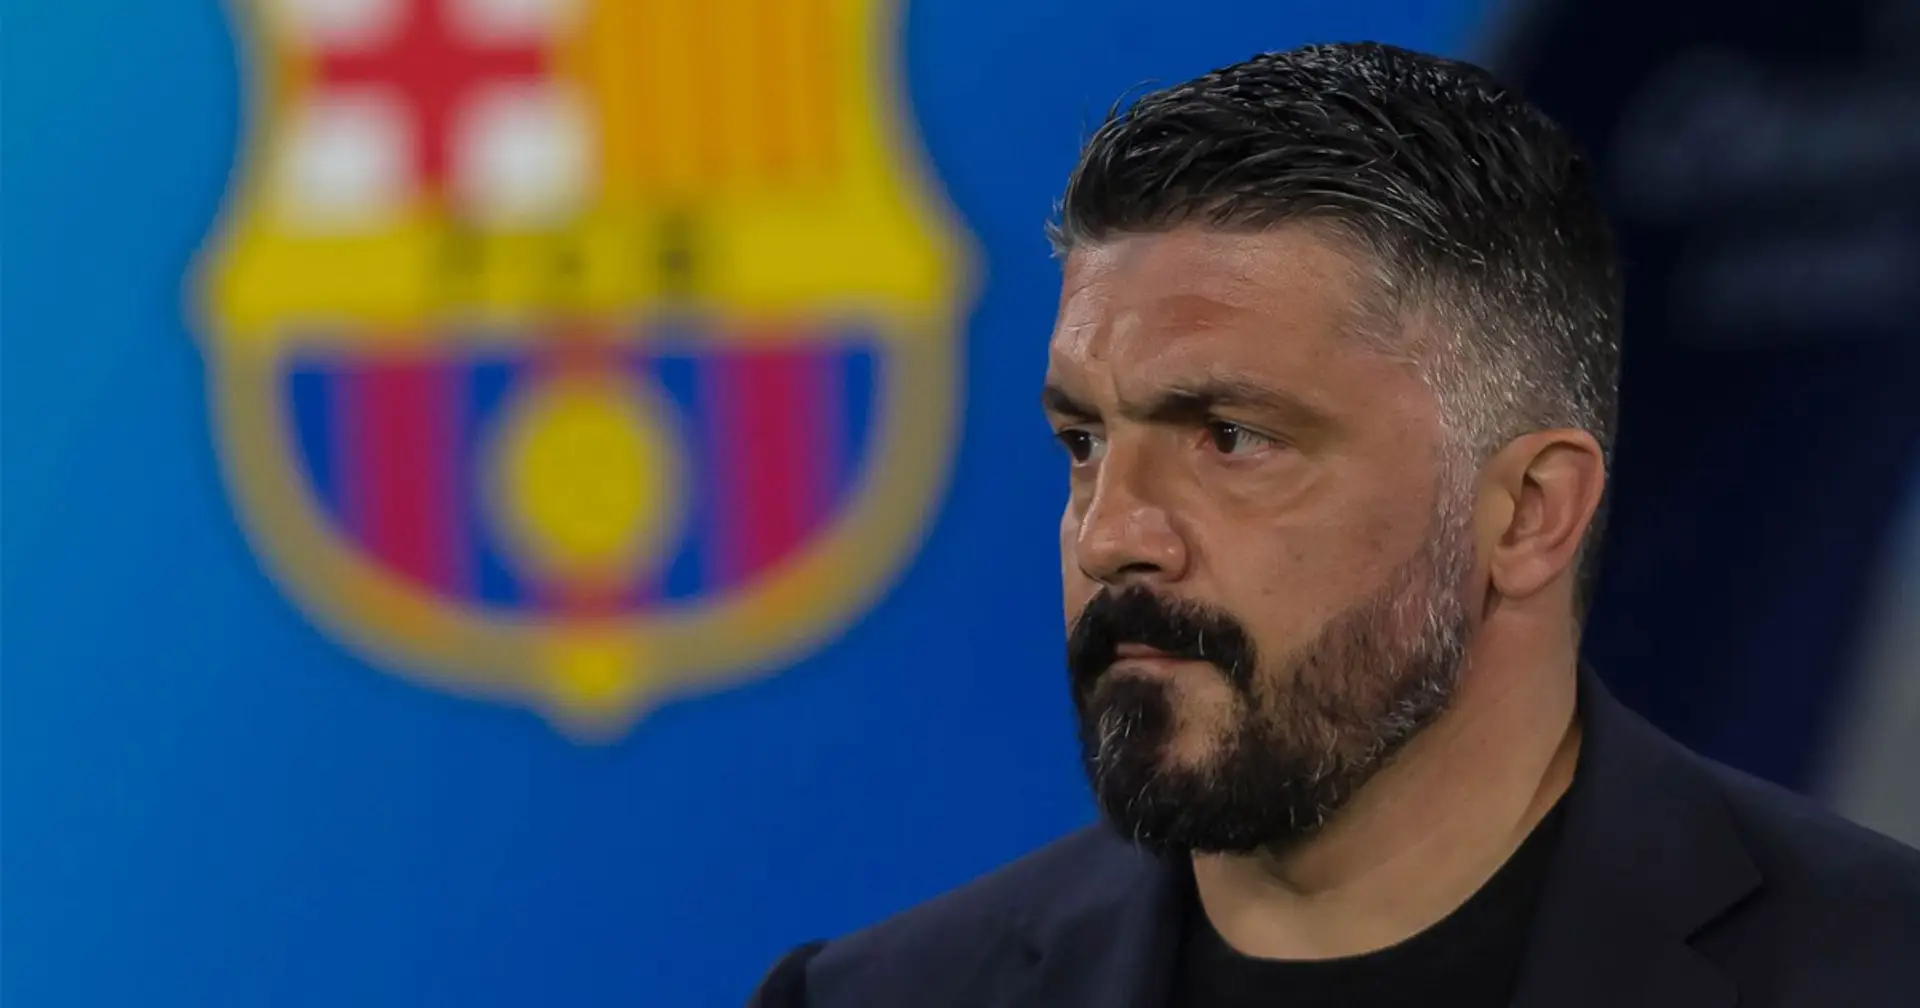 Gattuso warns his players: 'If we go into match thinking Barca are in poor form, we'll be closer to cemetery than victory'